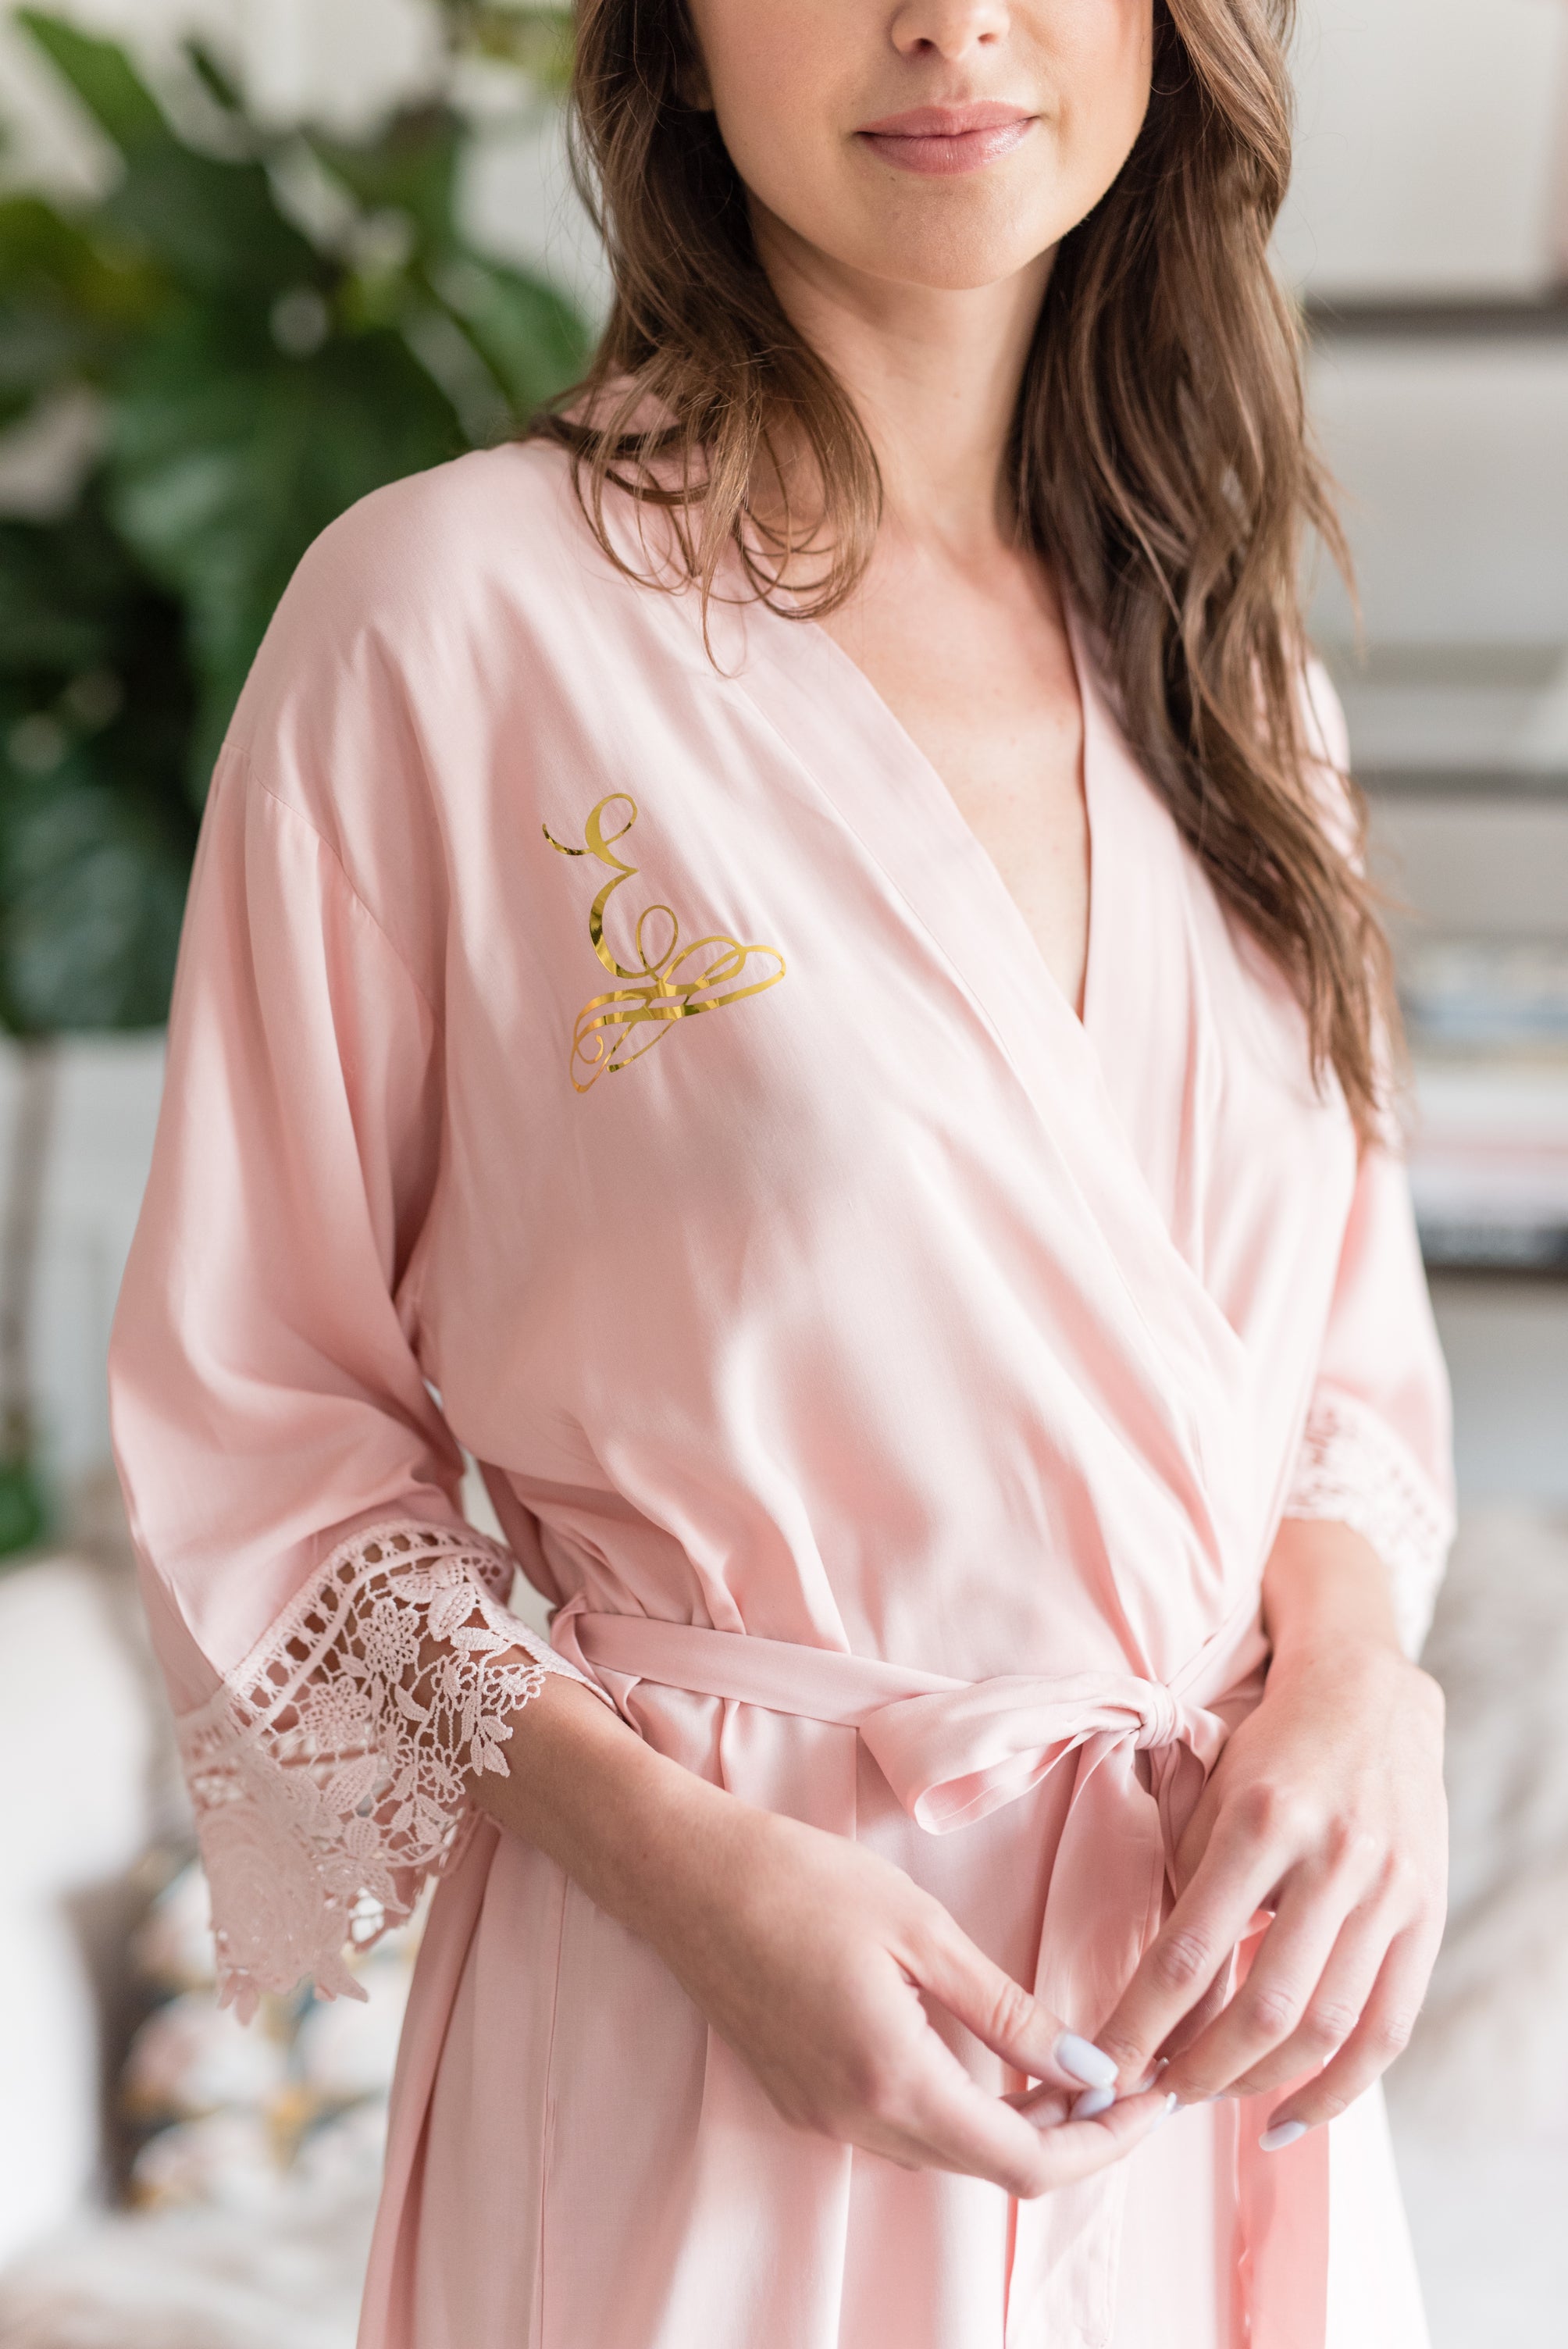 Satin Bridesmaid Robes - Personalized Dusty Rose Satin Bridesmaid robe with monogram on the front of the robe.